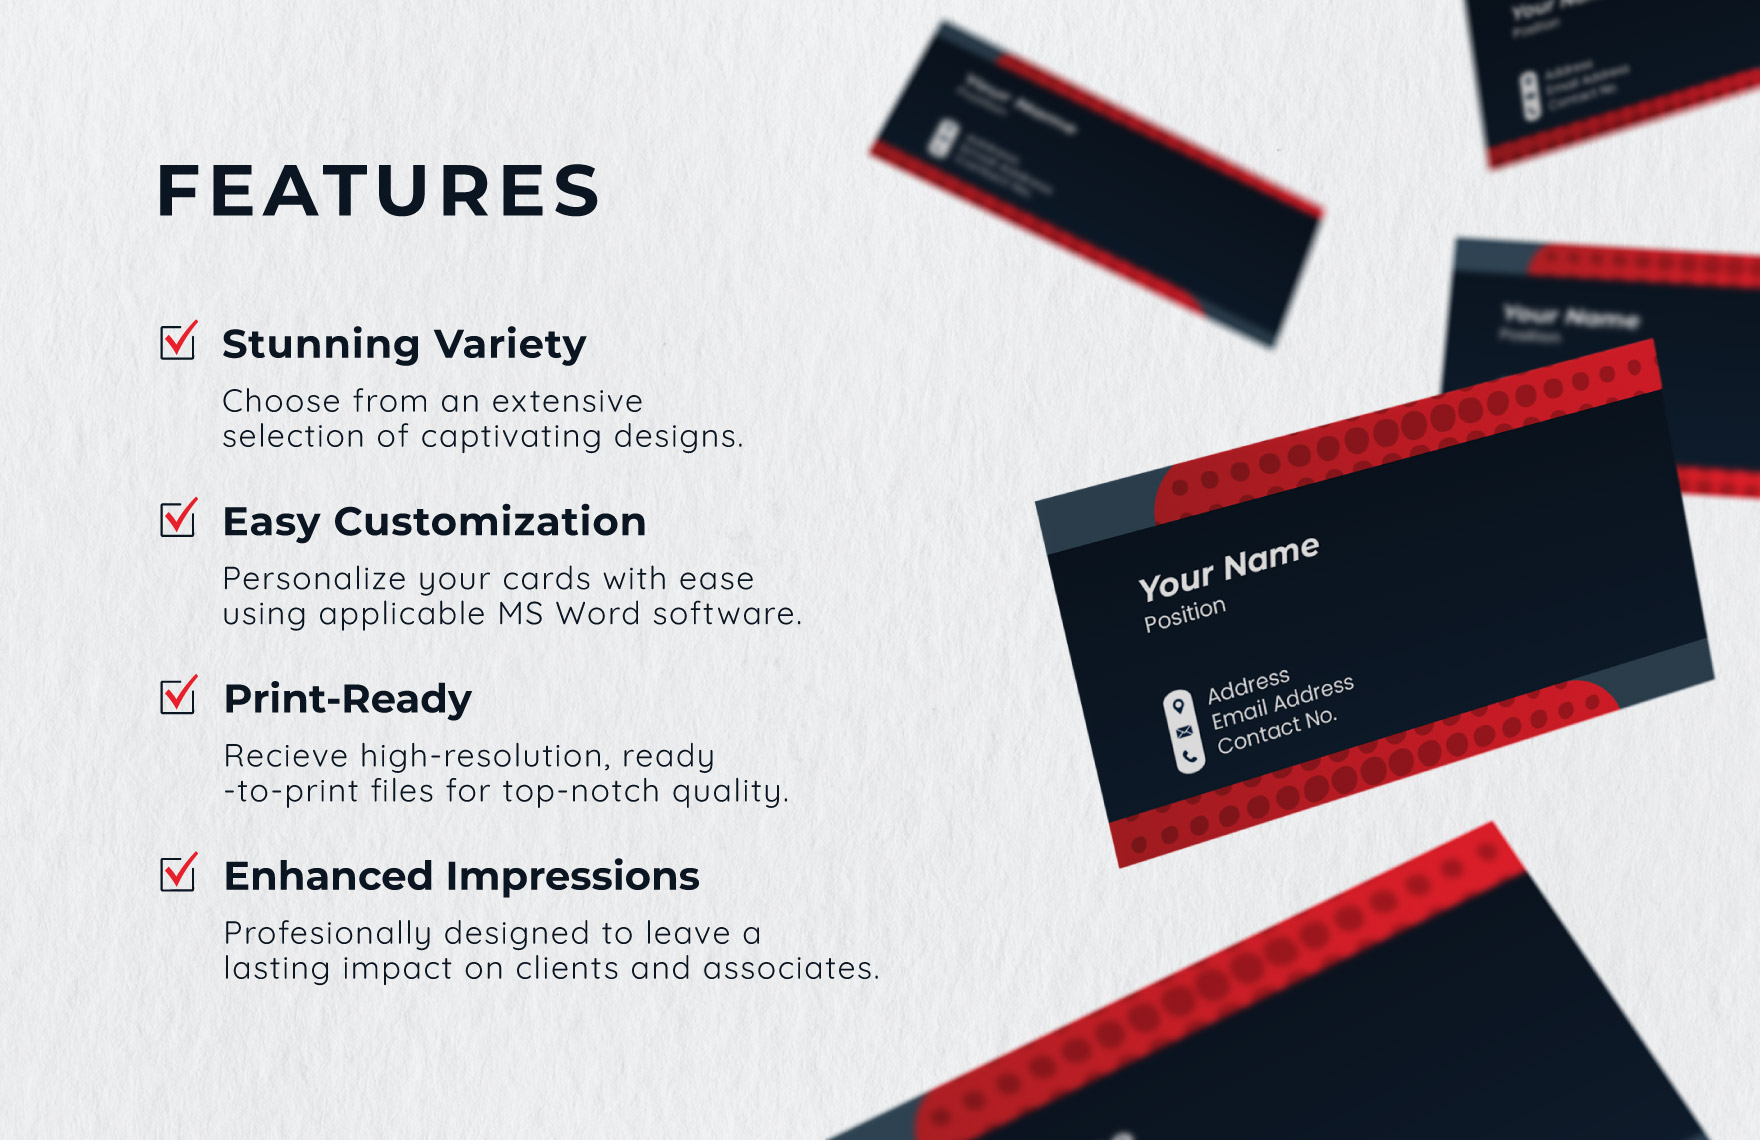 Business Card Format Template